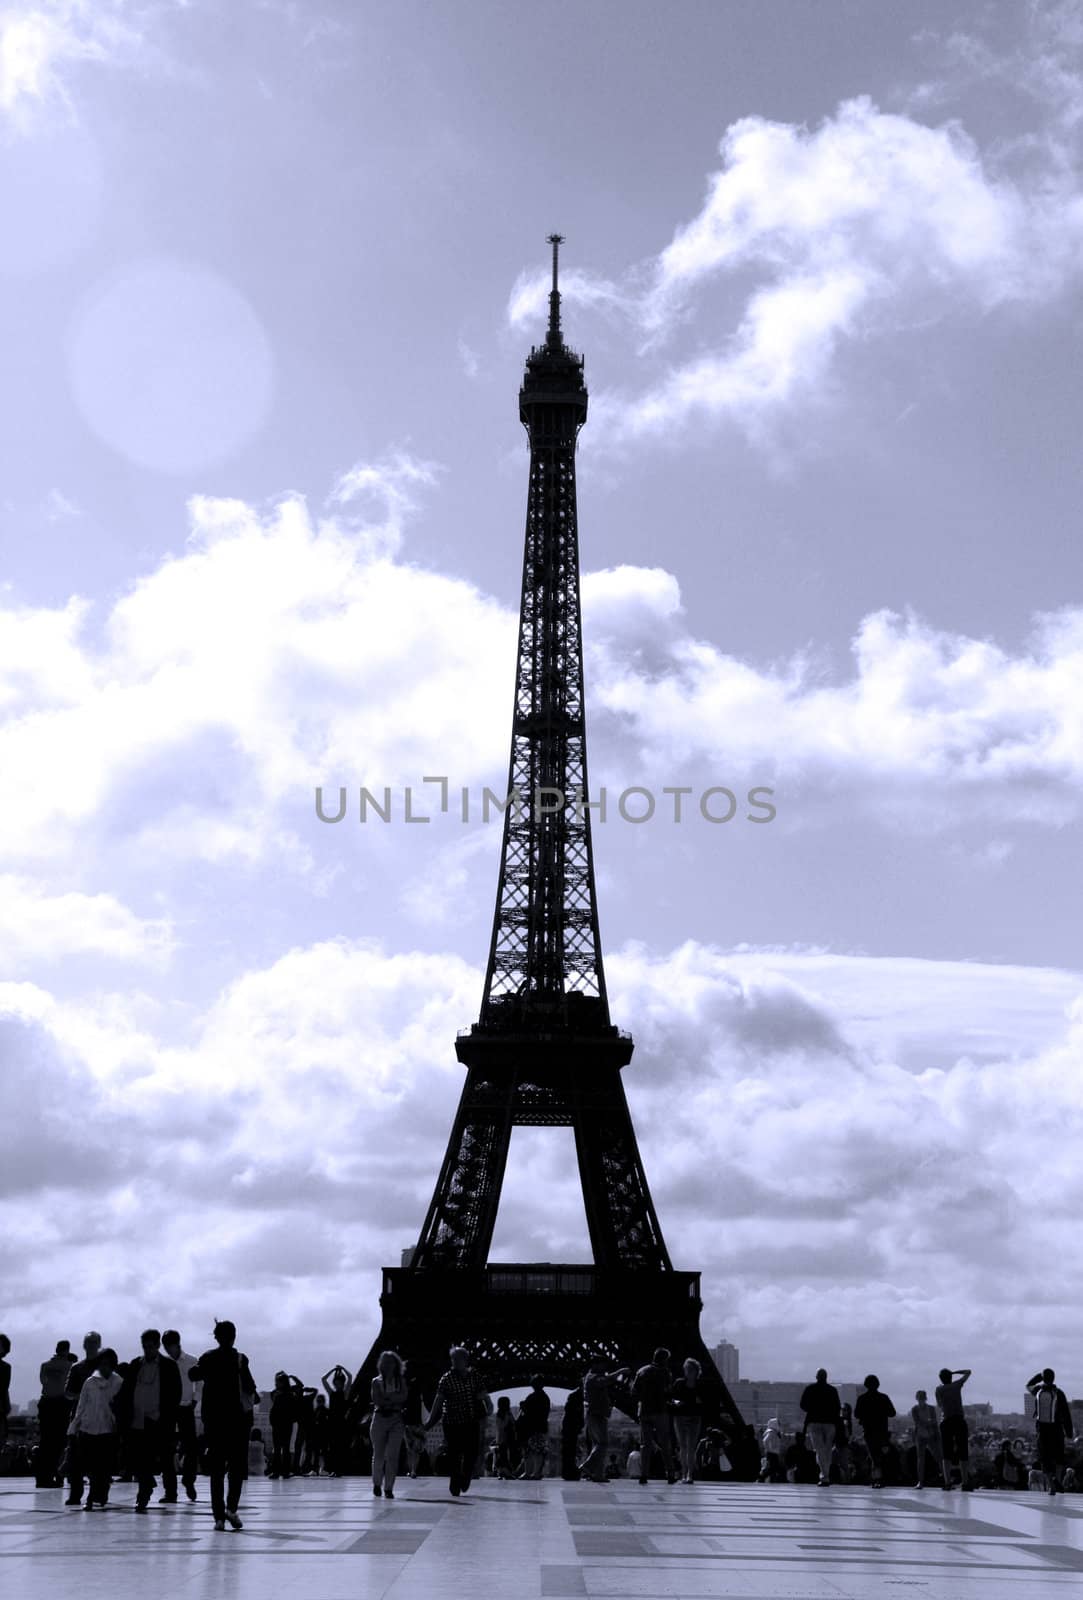 Capital of France - Paris. The Eiffel Tower. The view from the Trocadero.